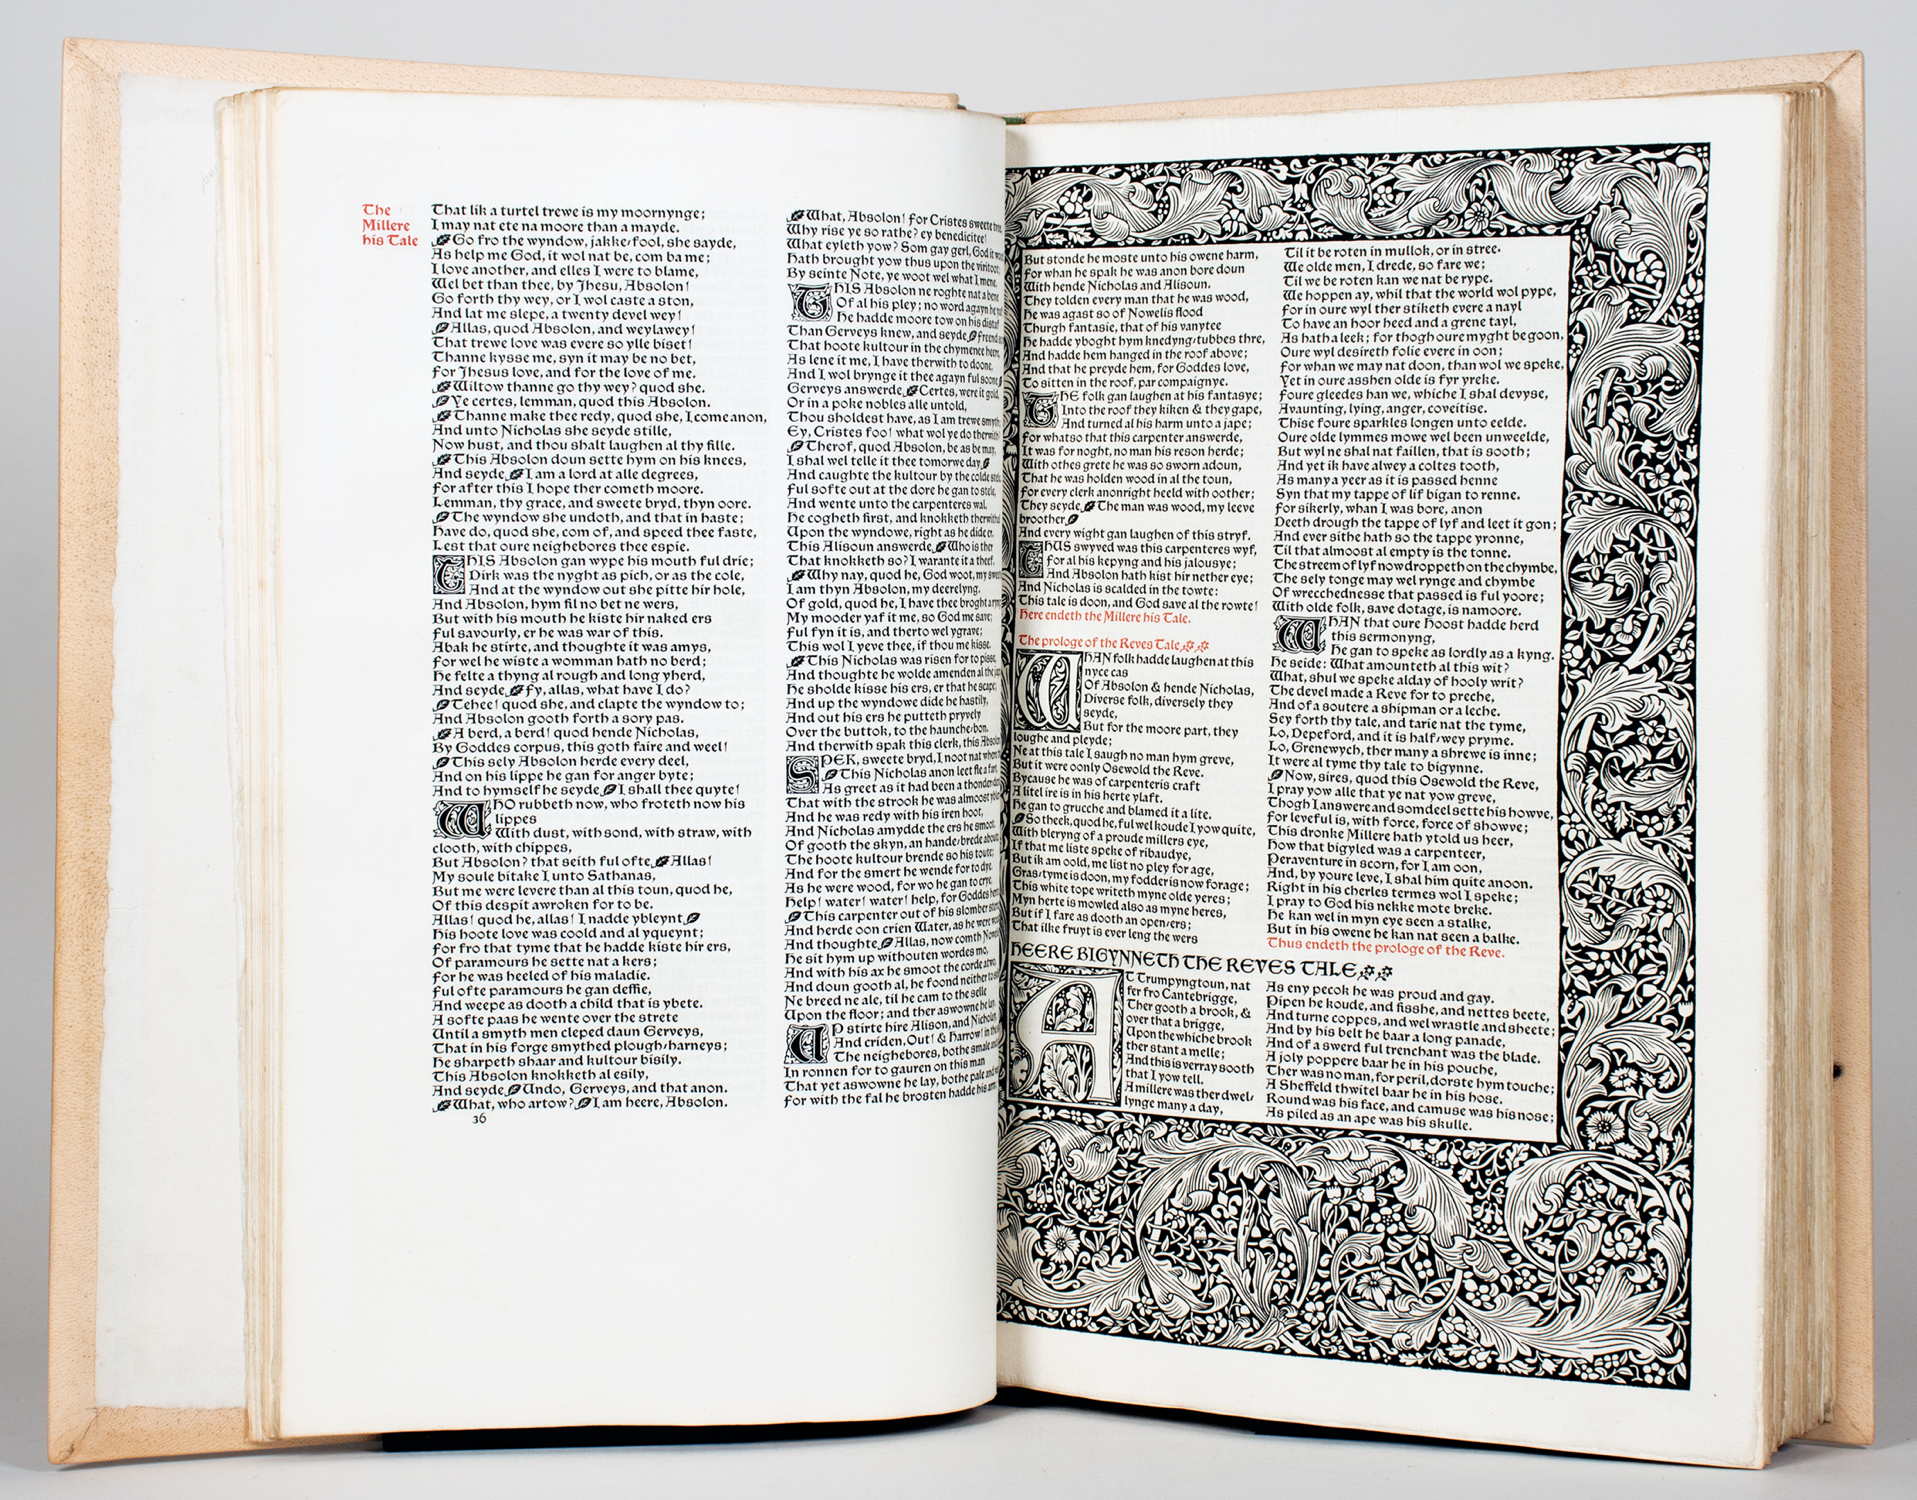 Kelmscott - Chaucer. The Works. 1896 - Image 5 of 7